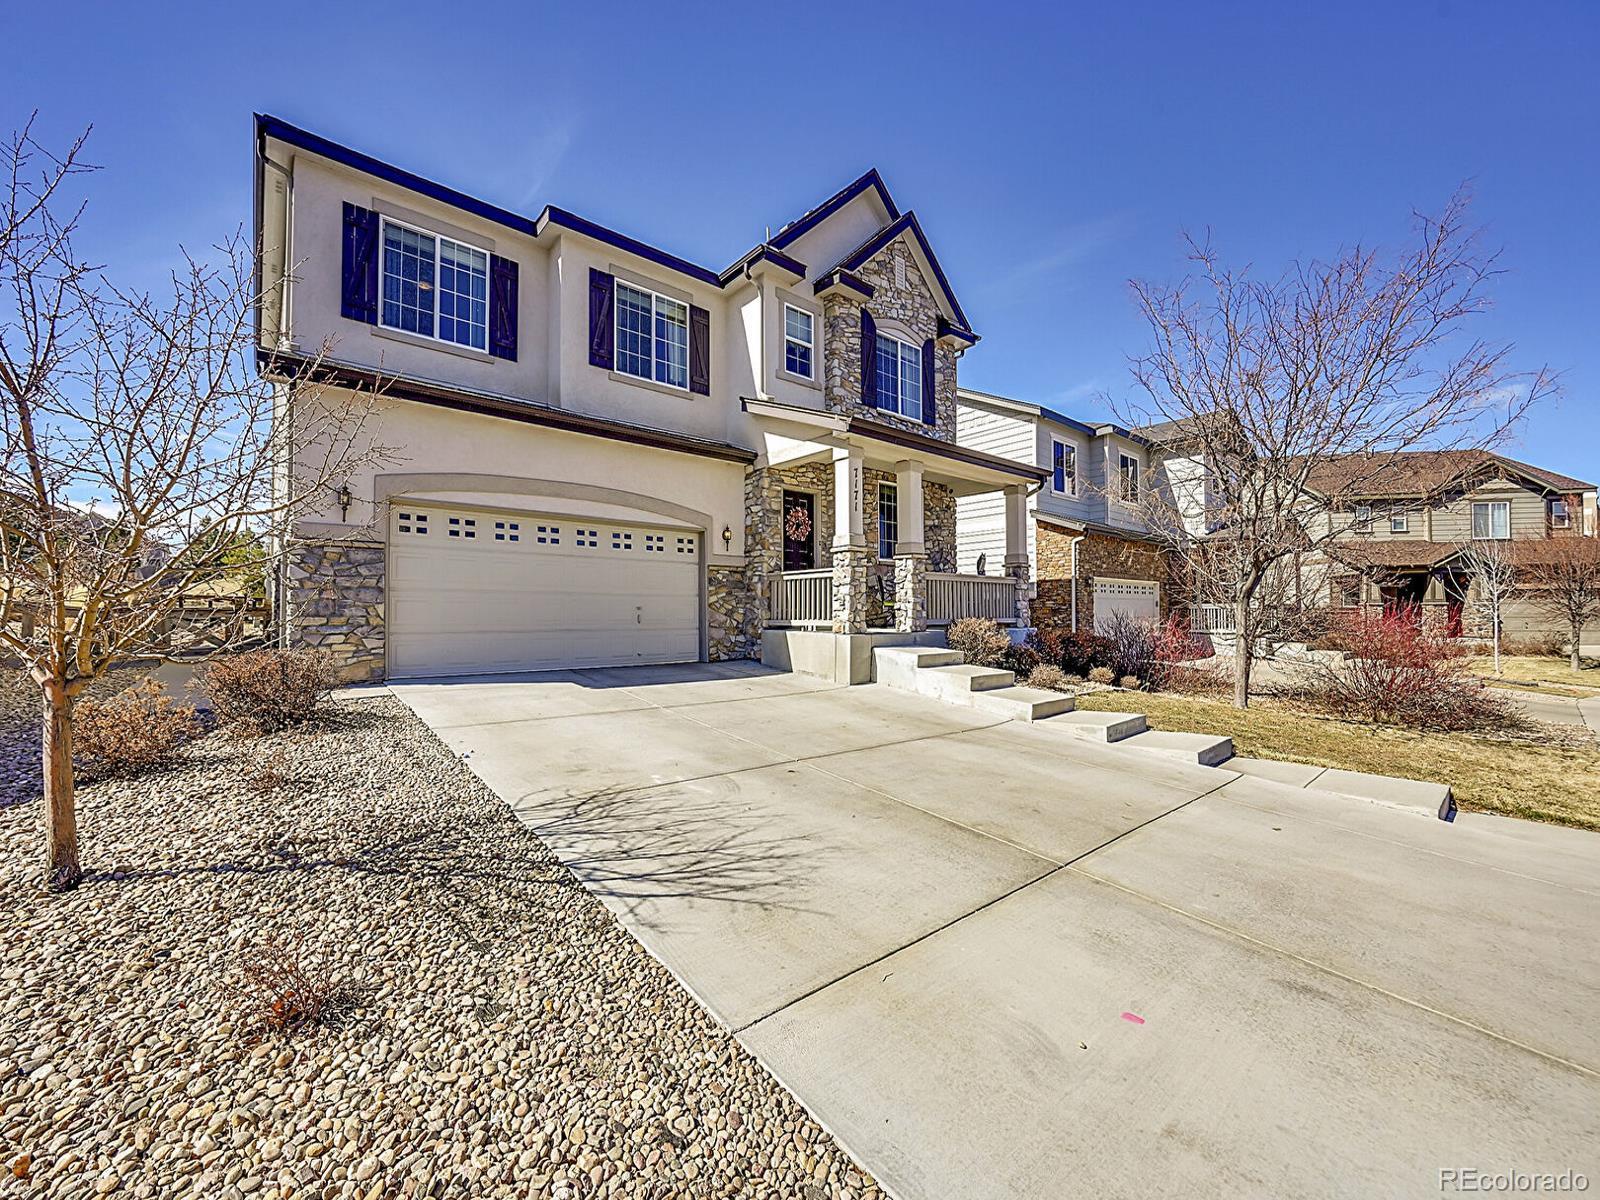 7171 s newbern court, aurora sold home. Closed on 2024-04-09 for $701,000.